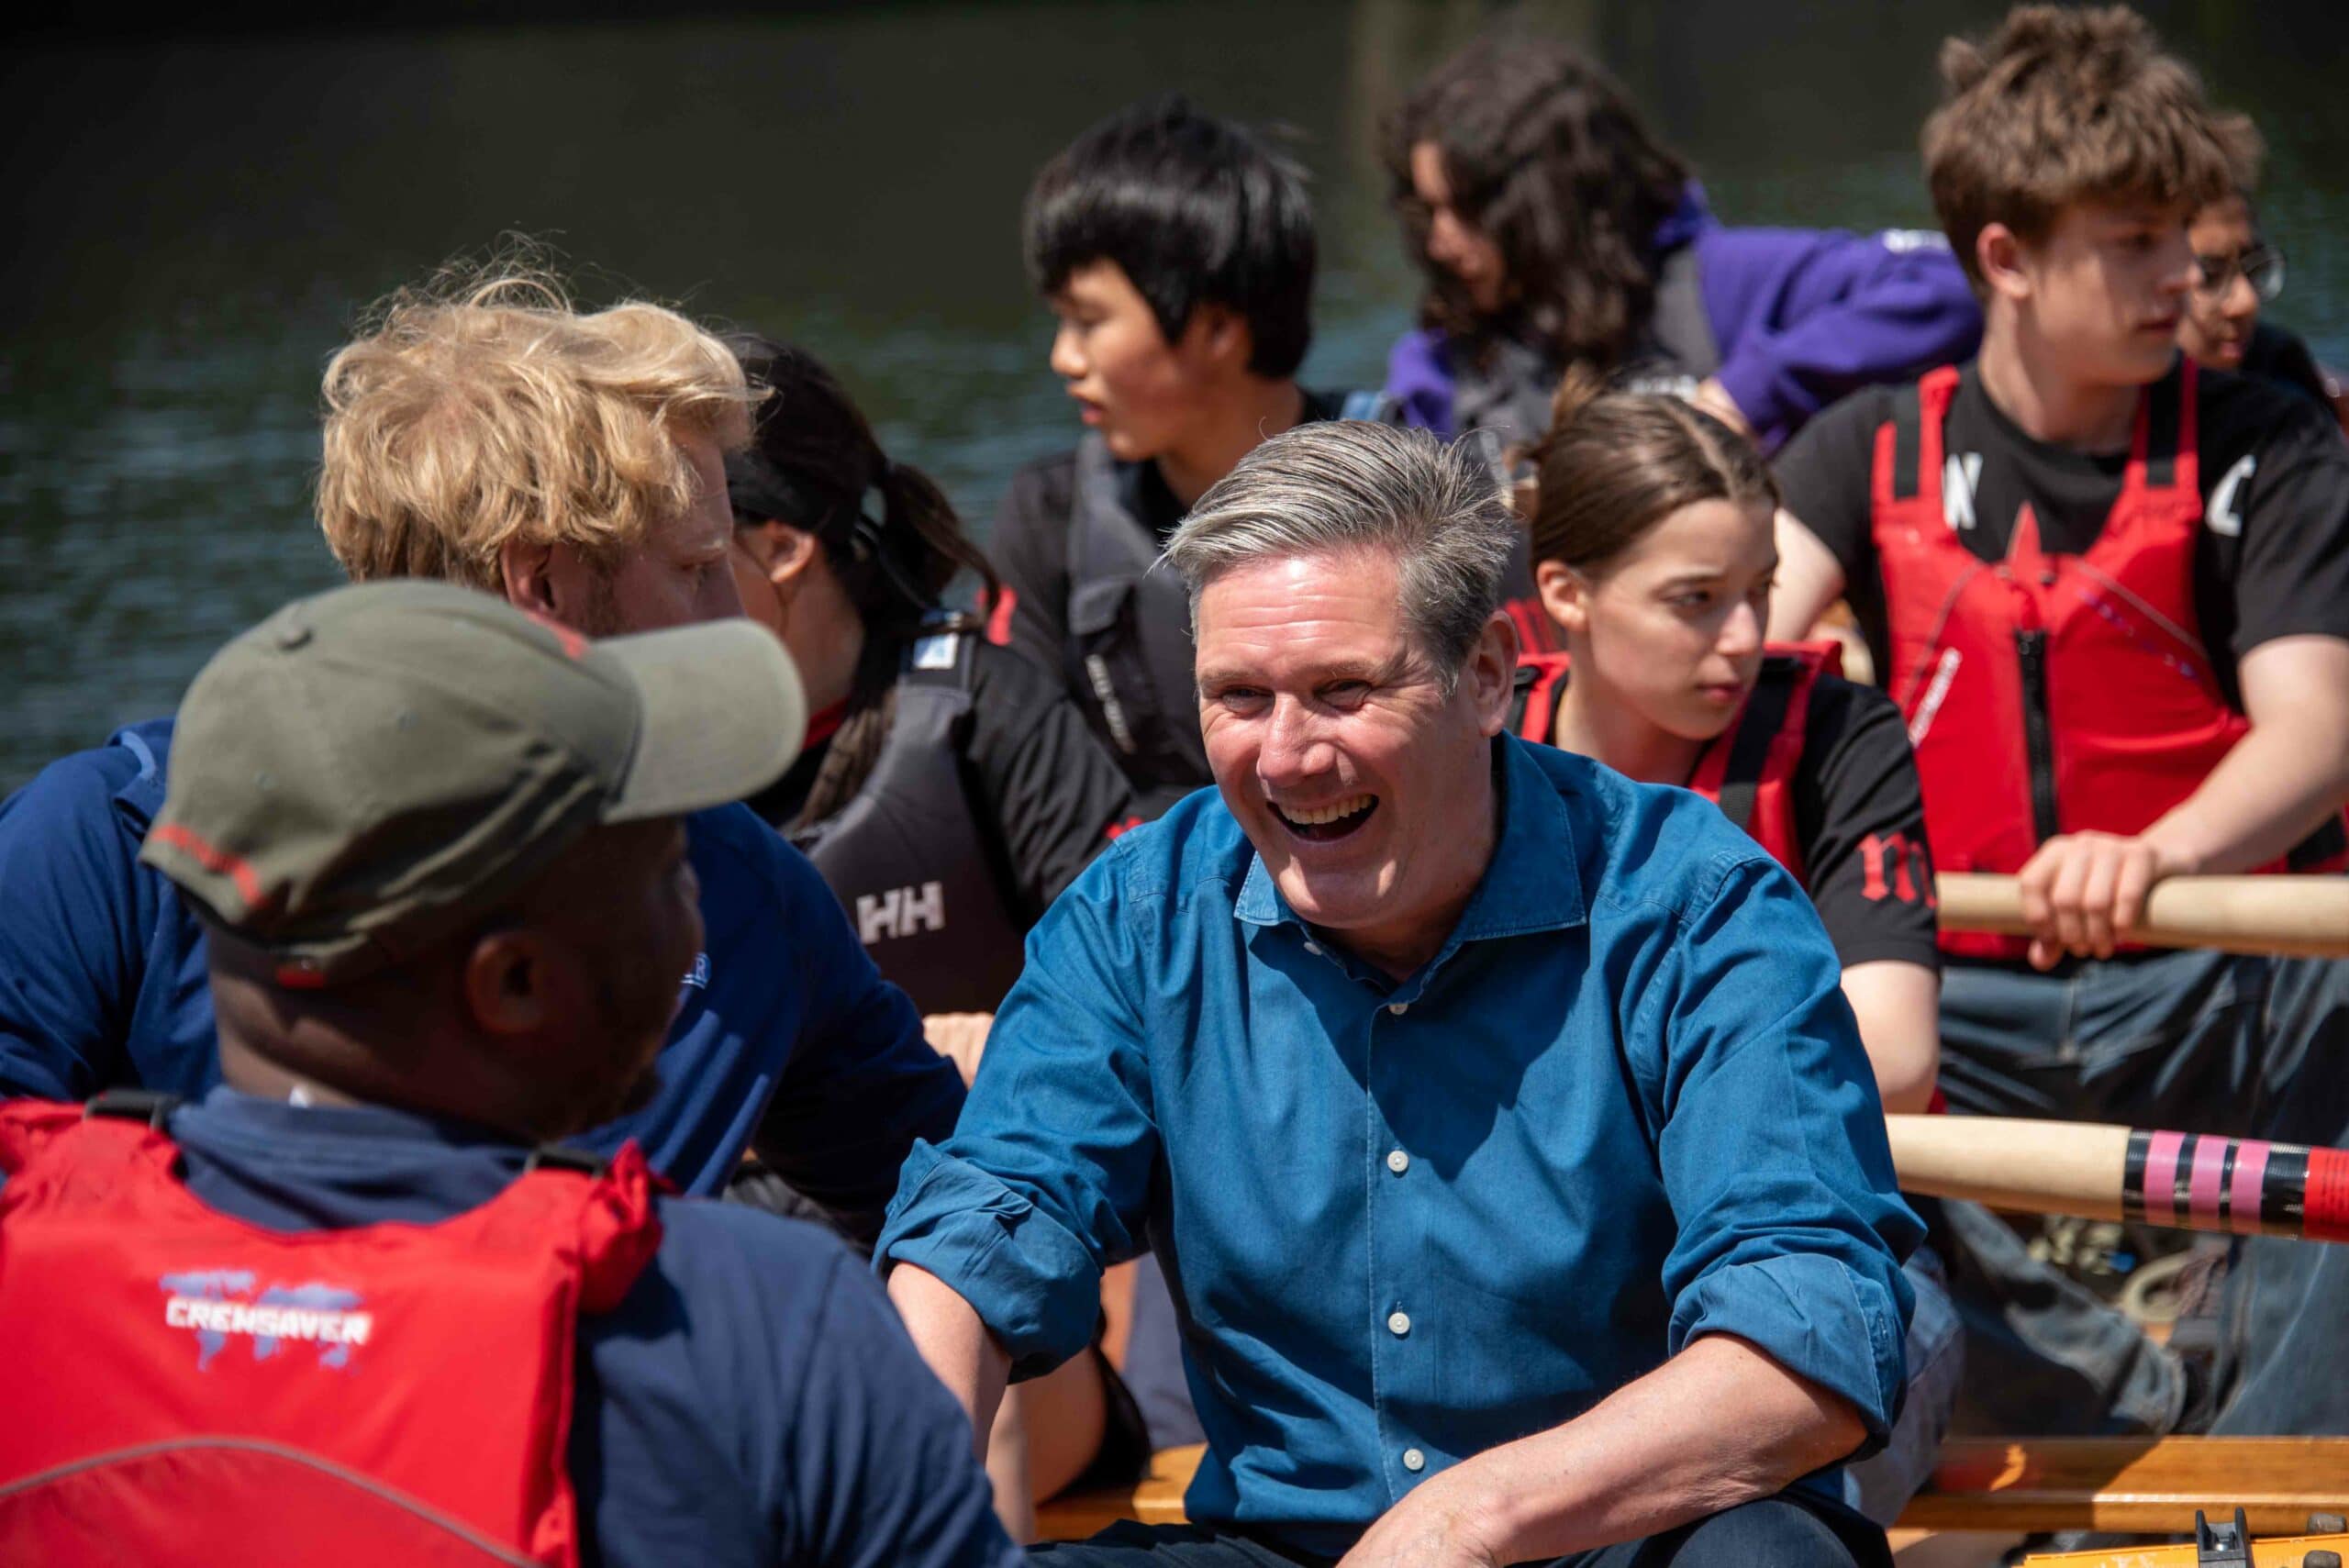 Sir keir starmer joins london youth rowing at the olympic park for jubilee celebrations